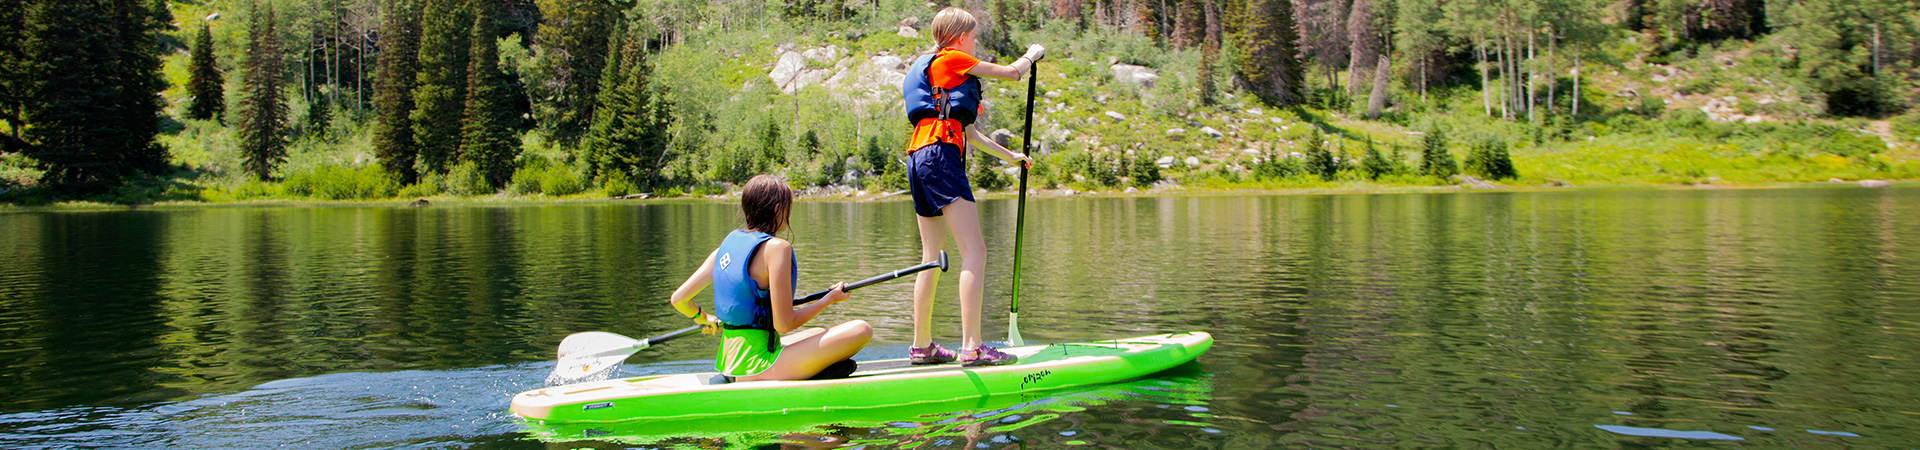  two girl scouts on a paddle board in a lake 